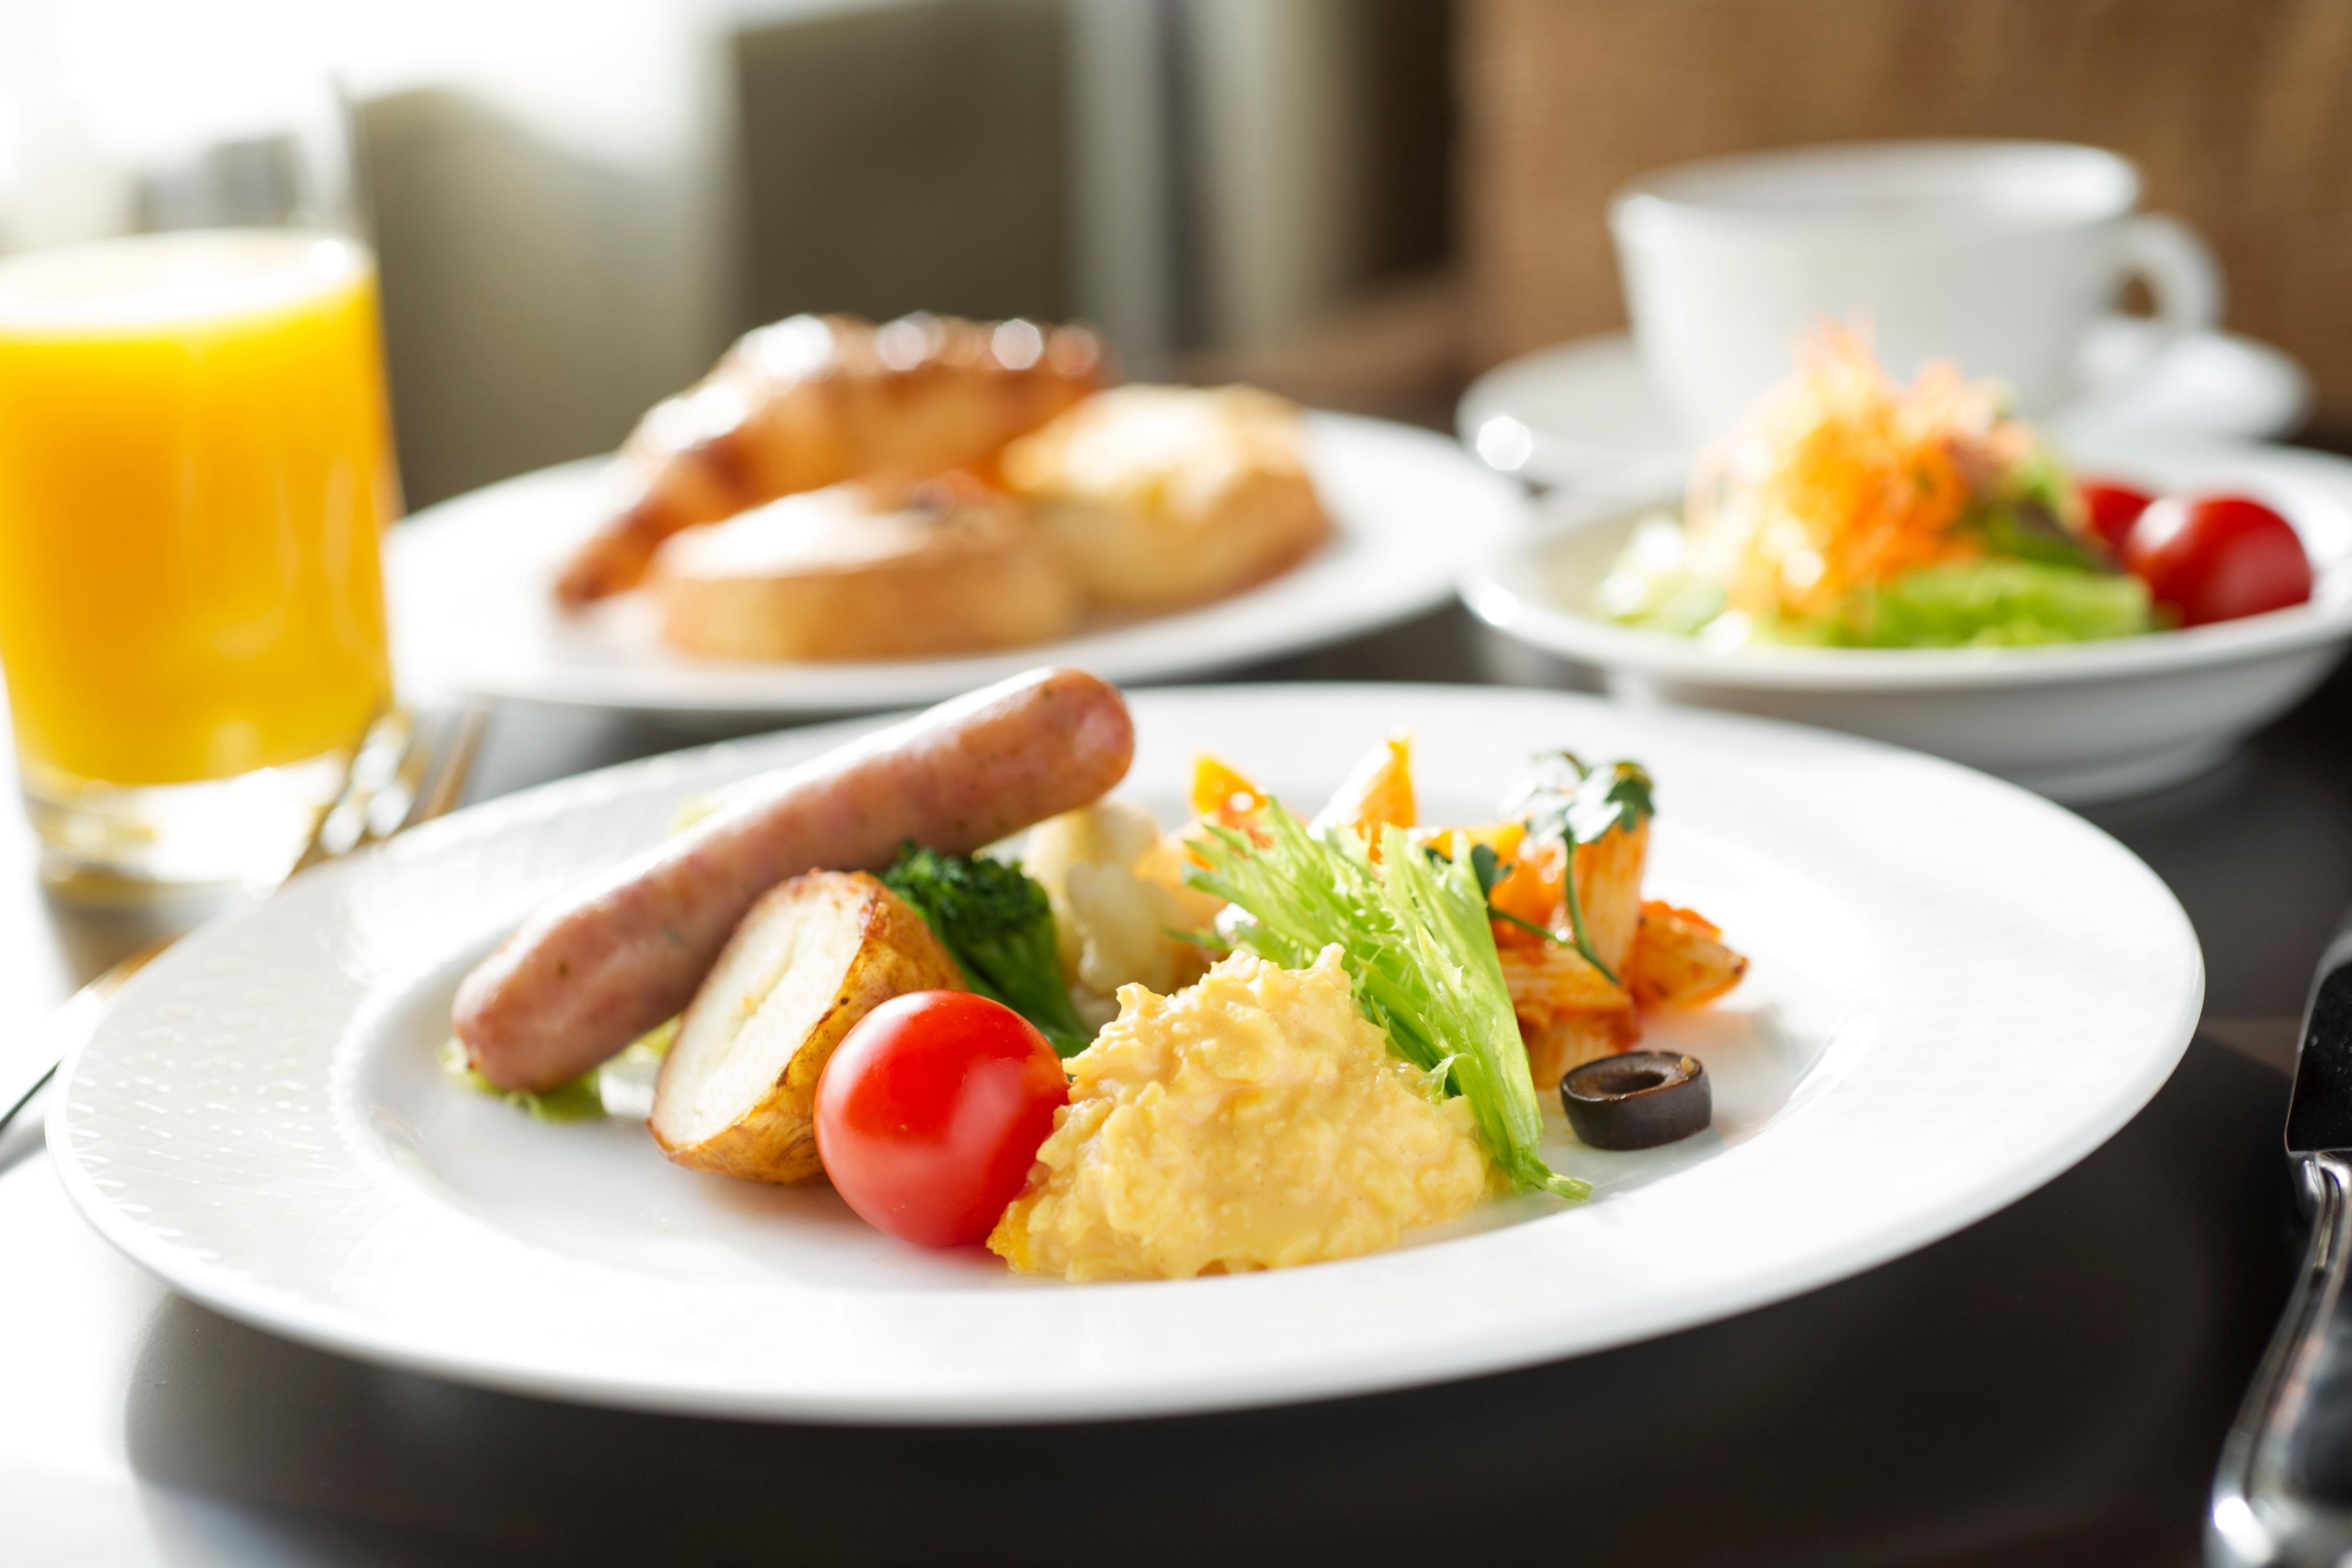 Breakfast at Club Lounge serves 25 varieties for your choice.